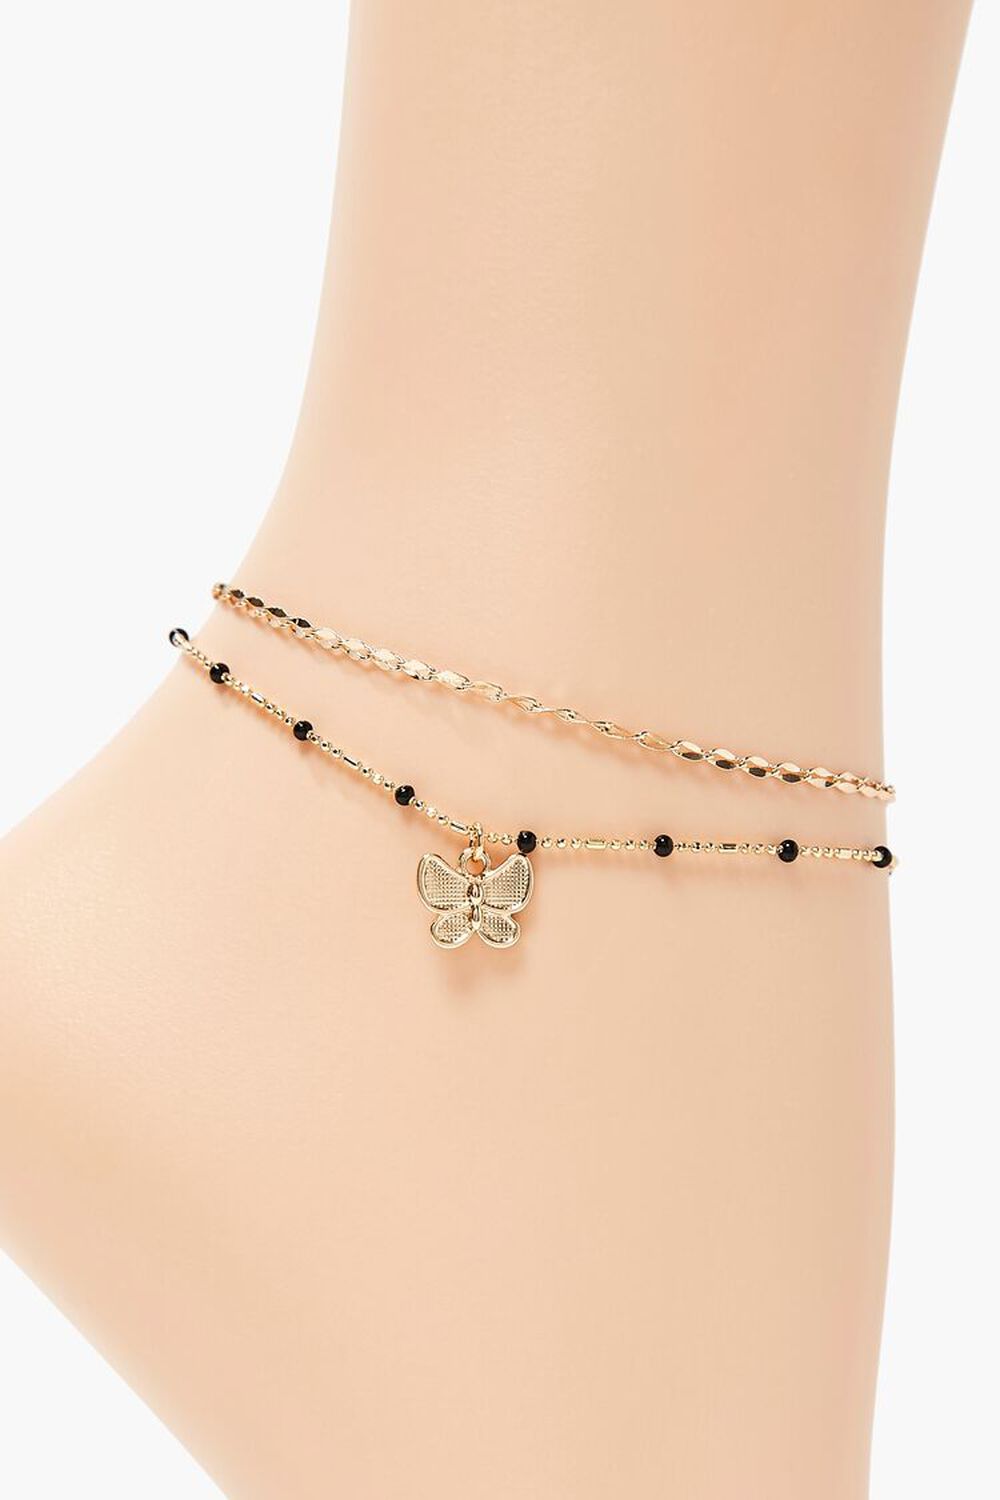 Butterfly Charm Layered Anklet, image 2